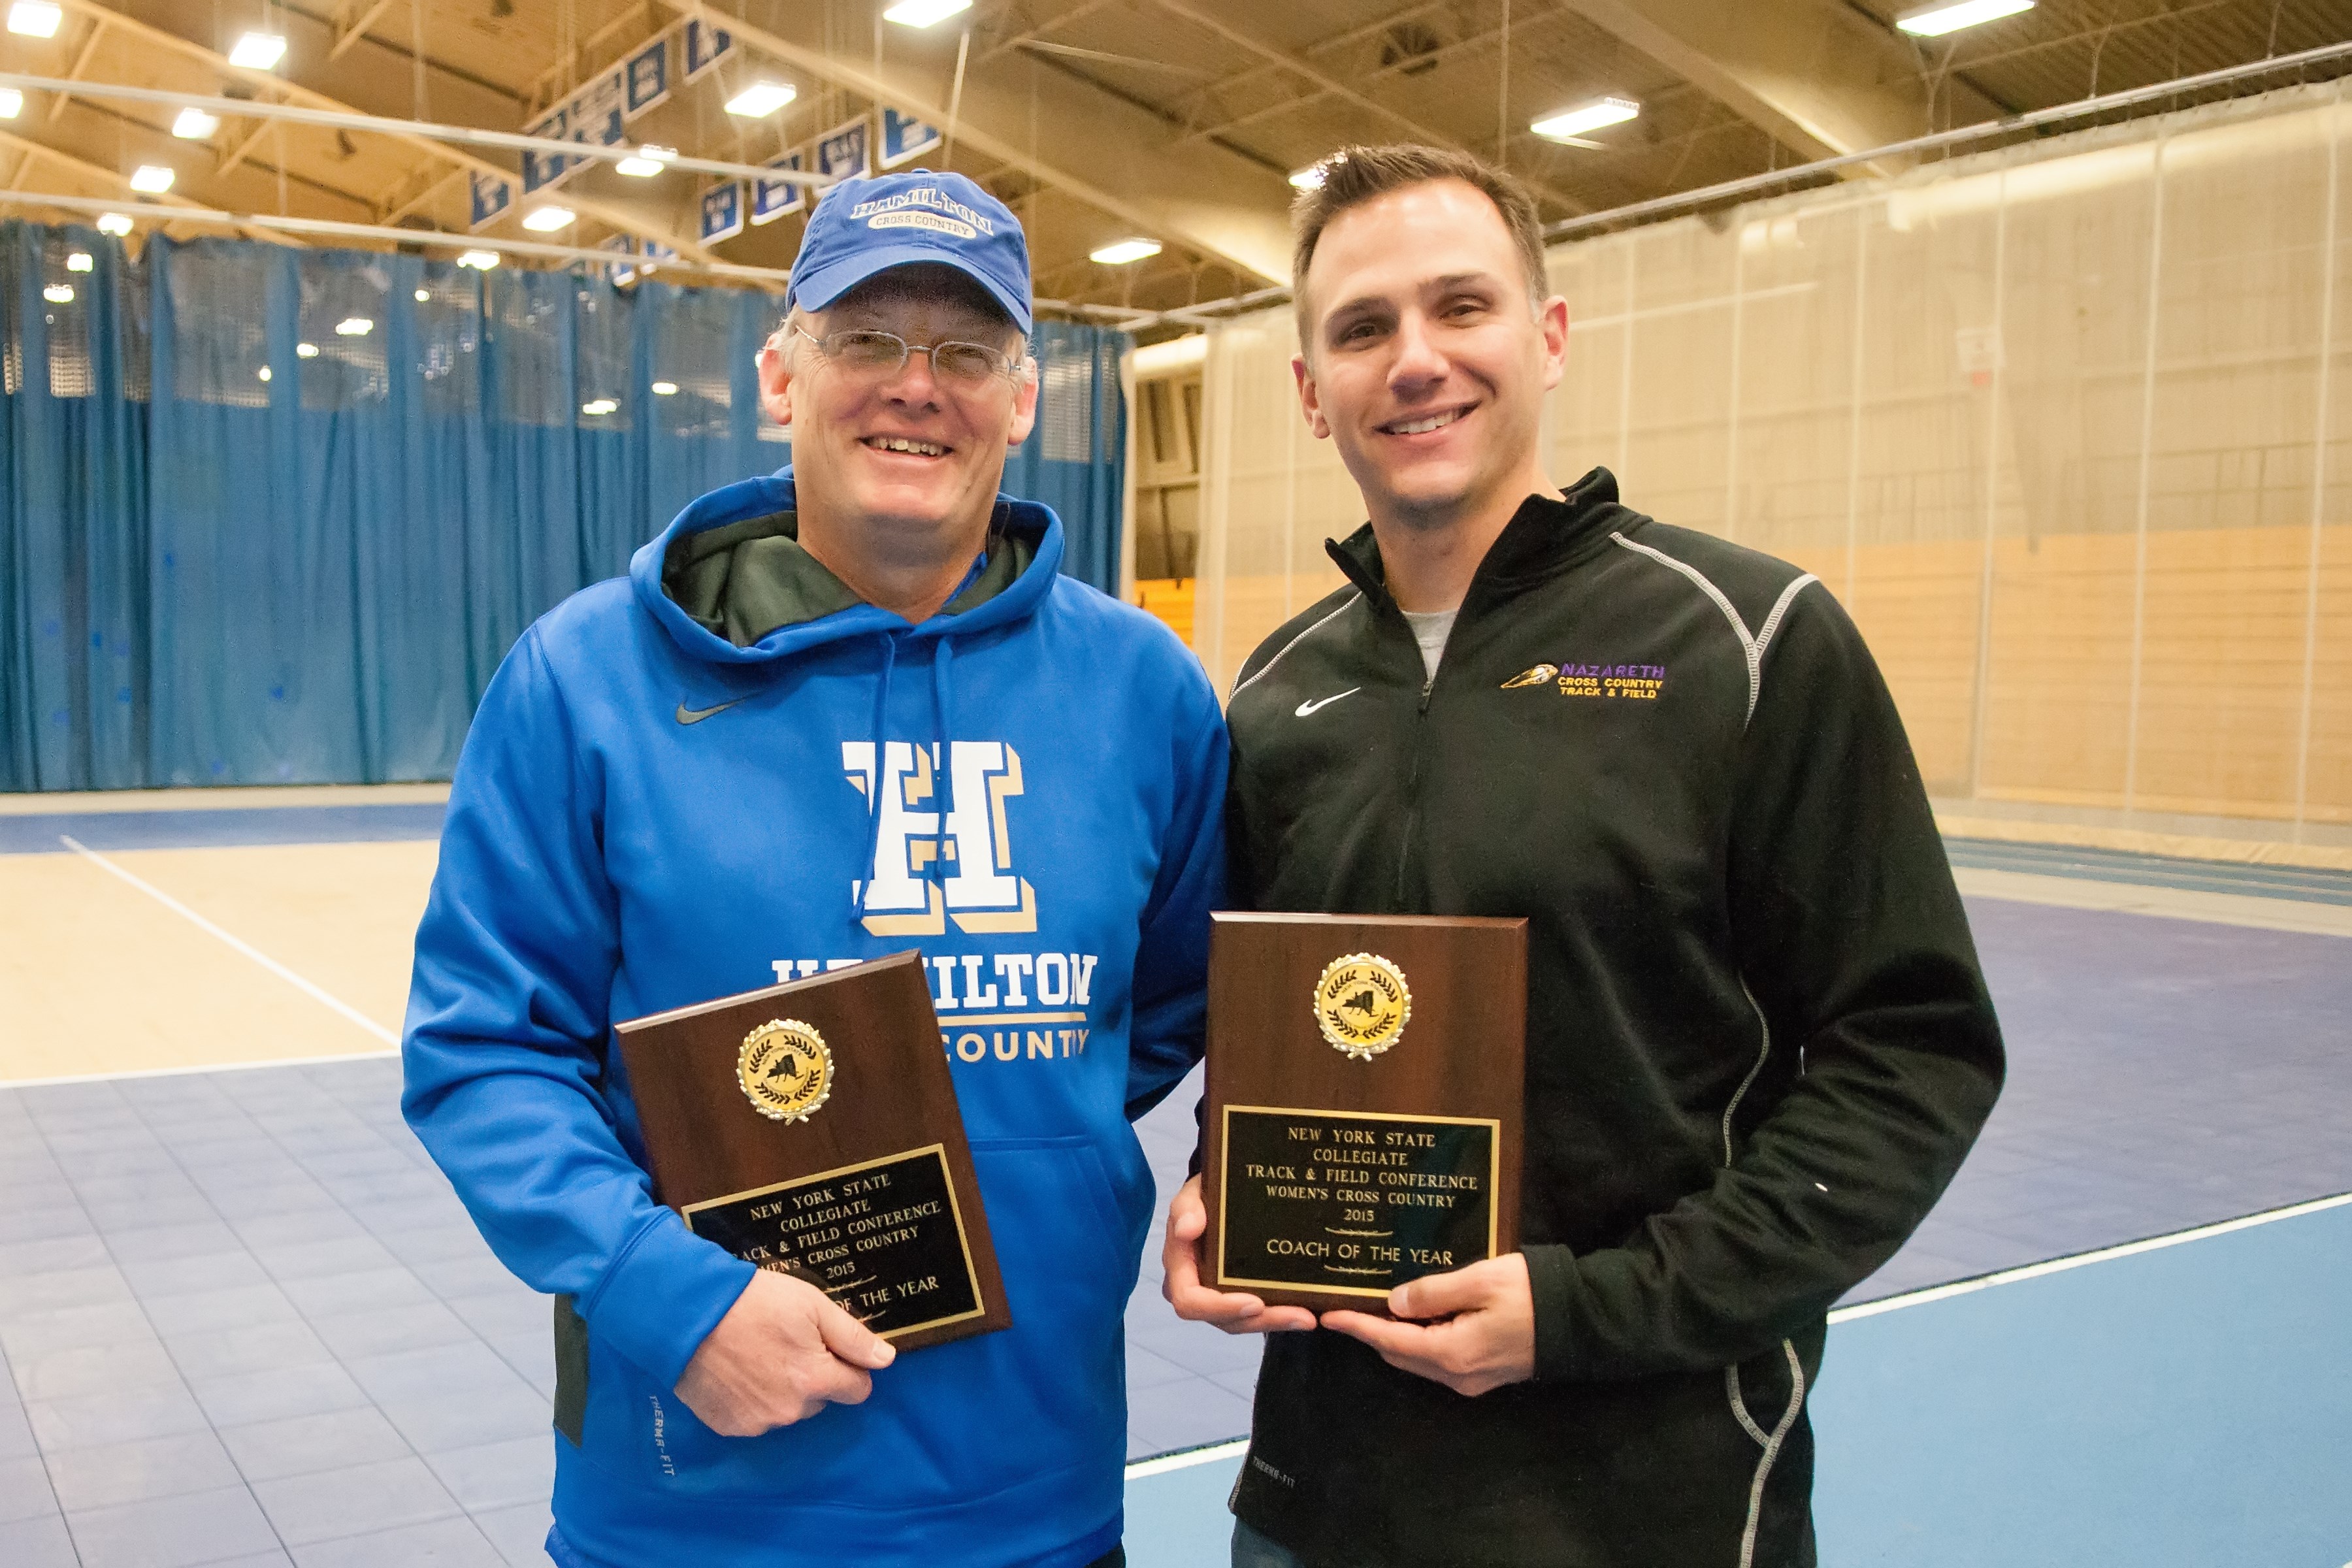 Hull is NESCAC men's cross country coach of the year - News - Hamilton  College